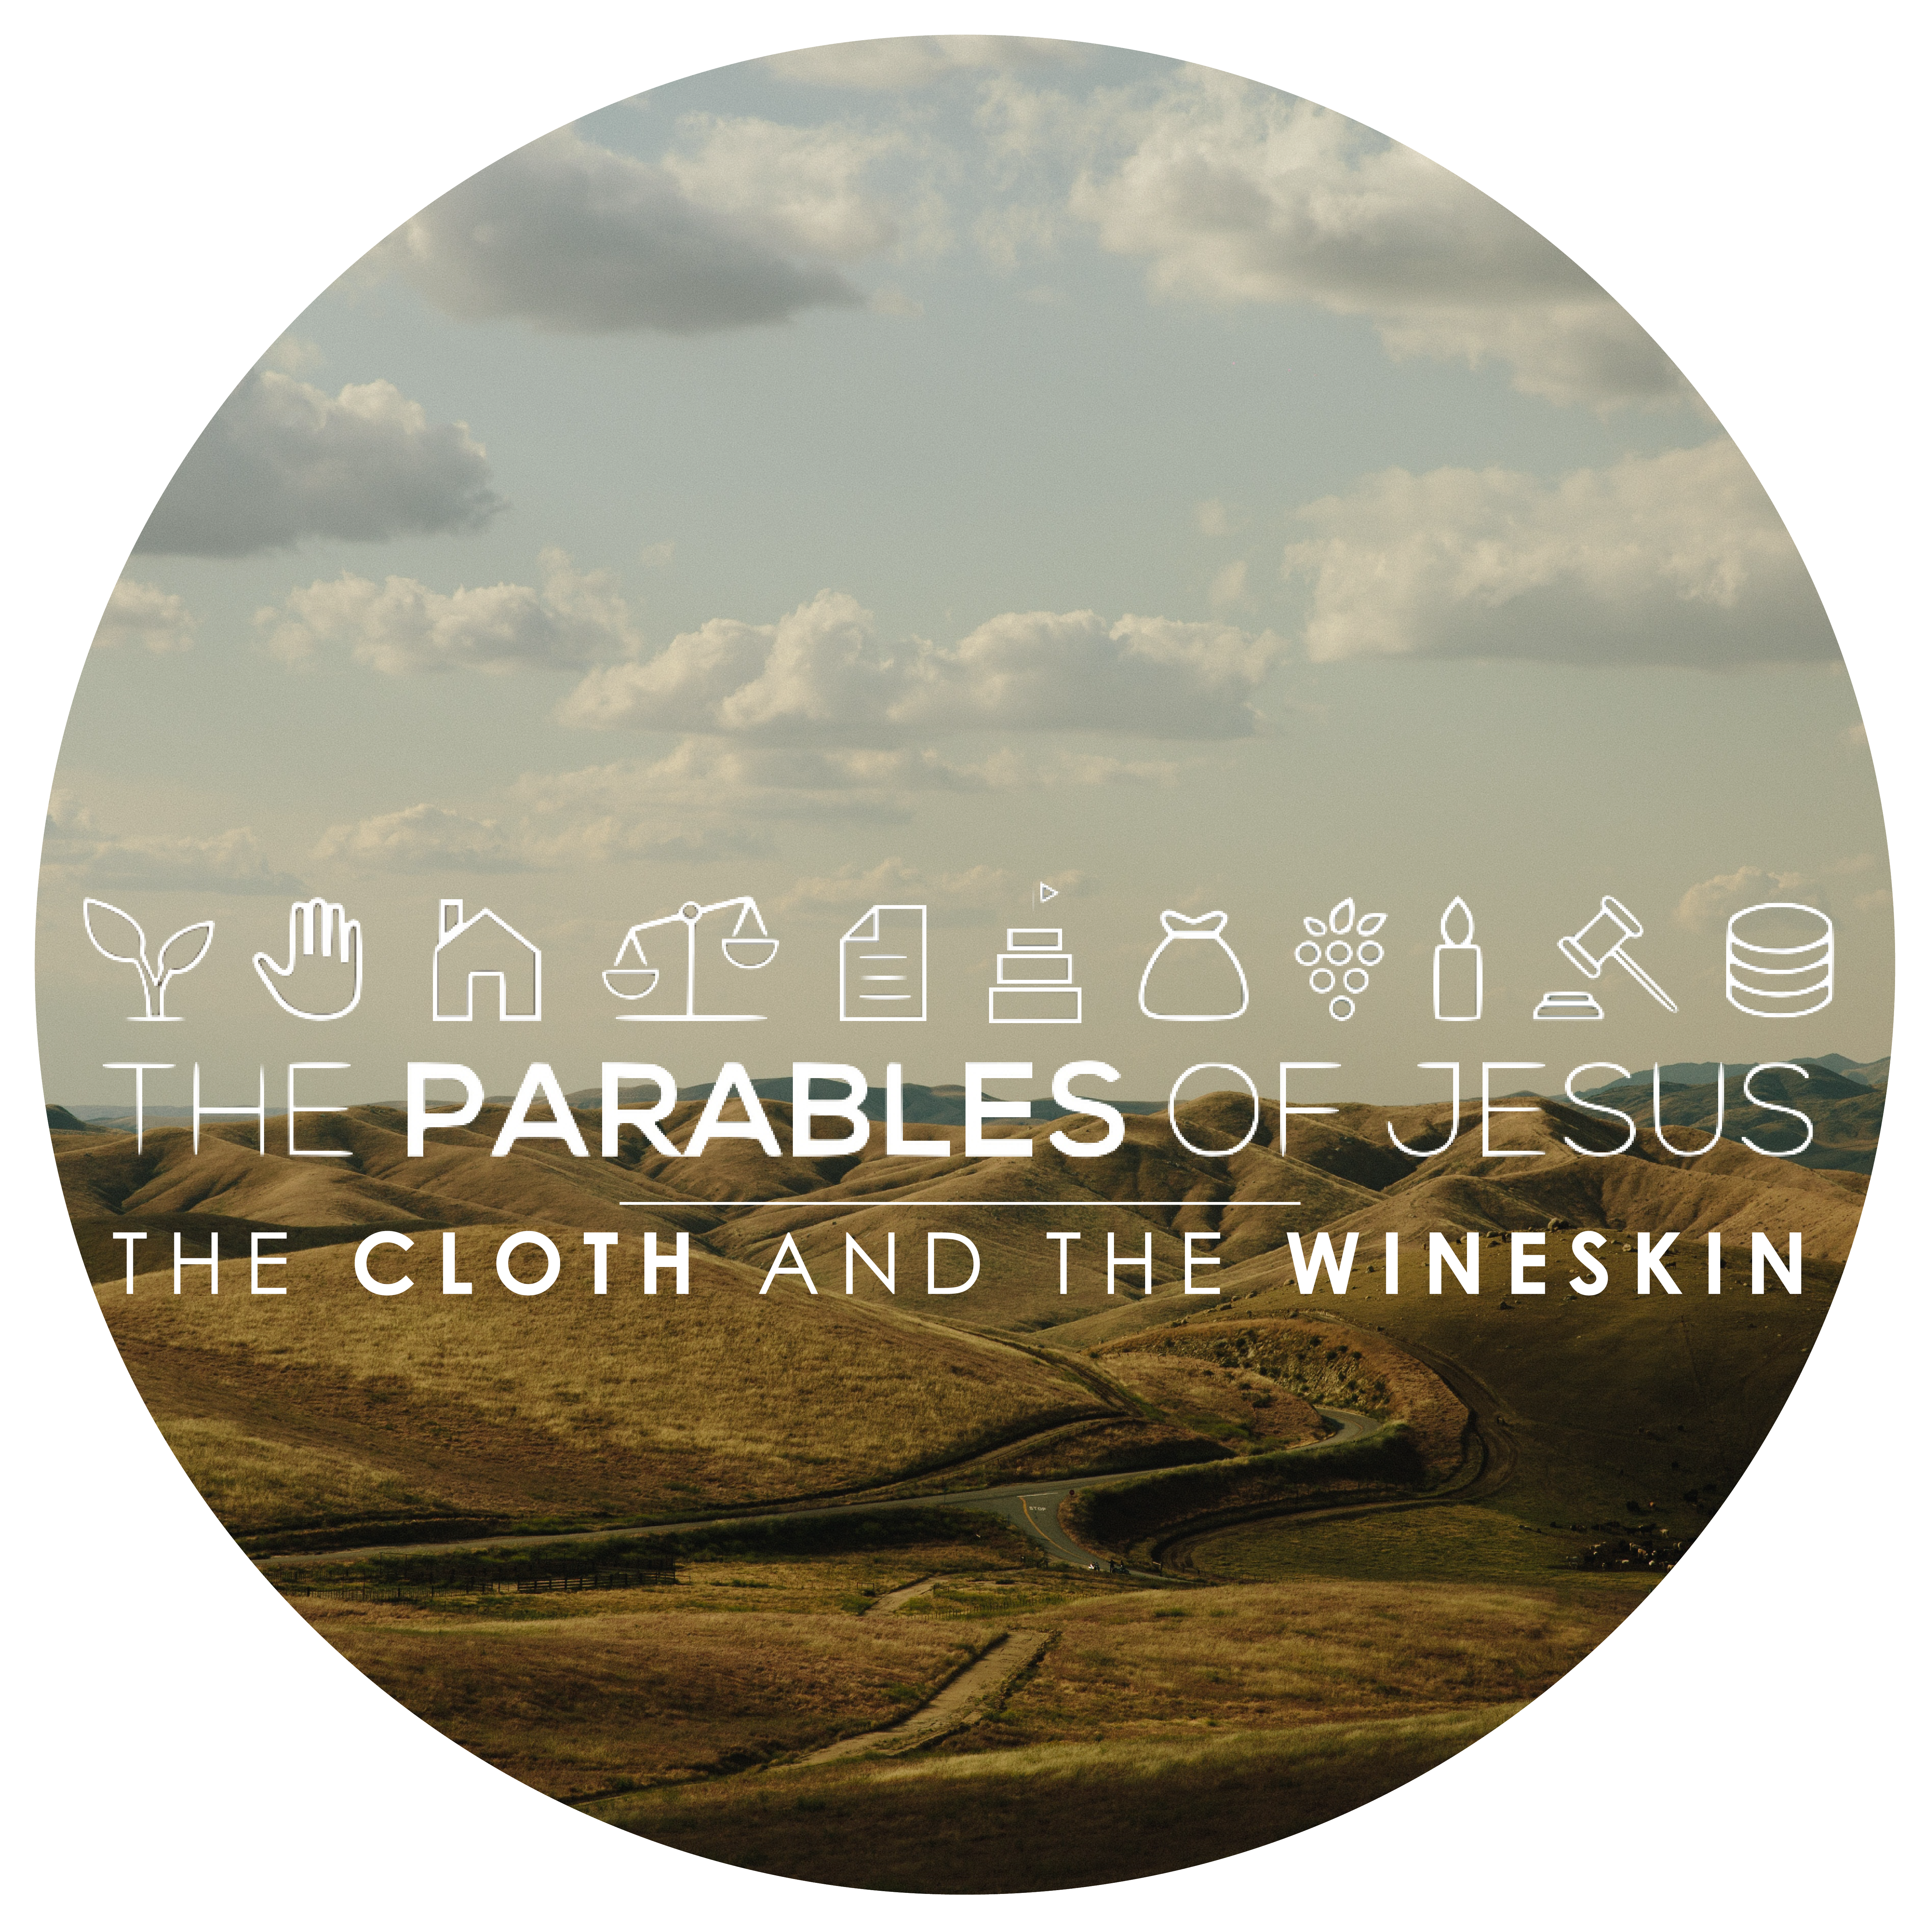 The Parables of Jesus: The Cloth and Wineskin